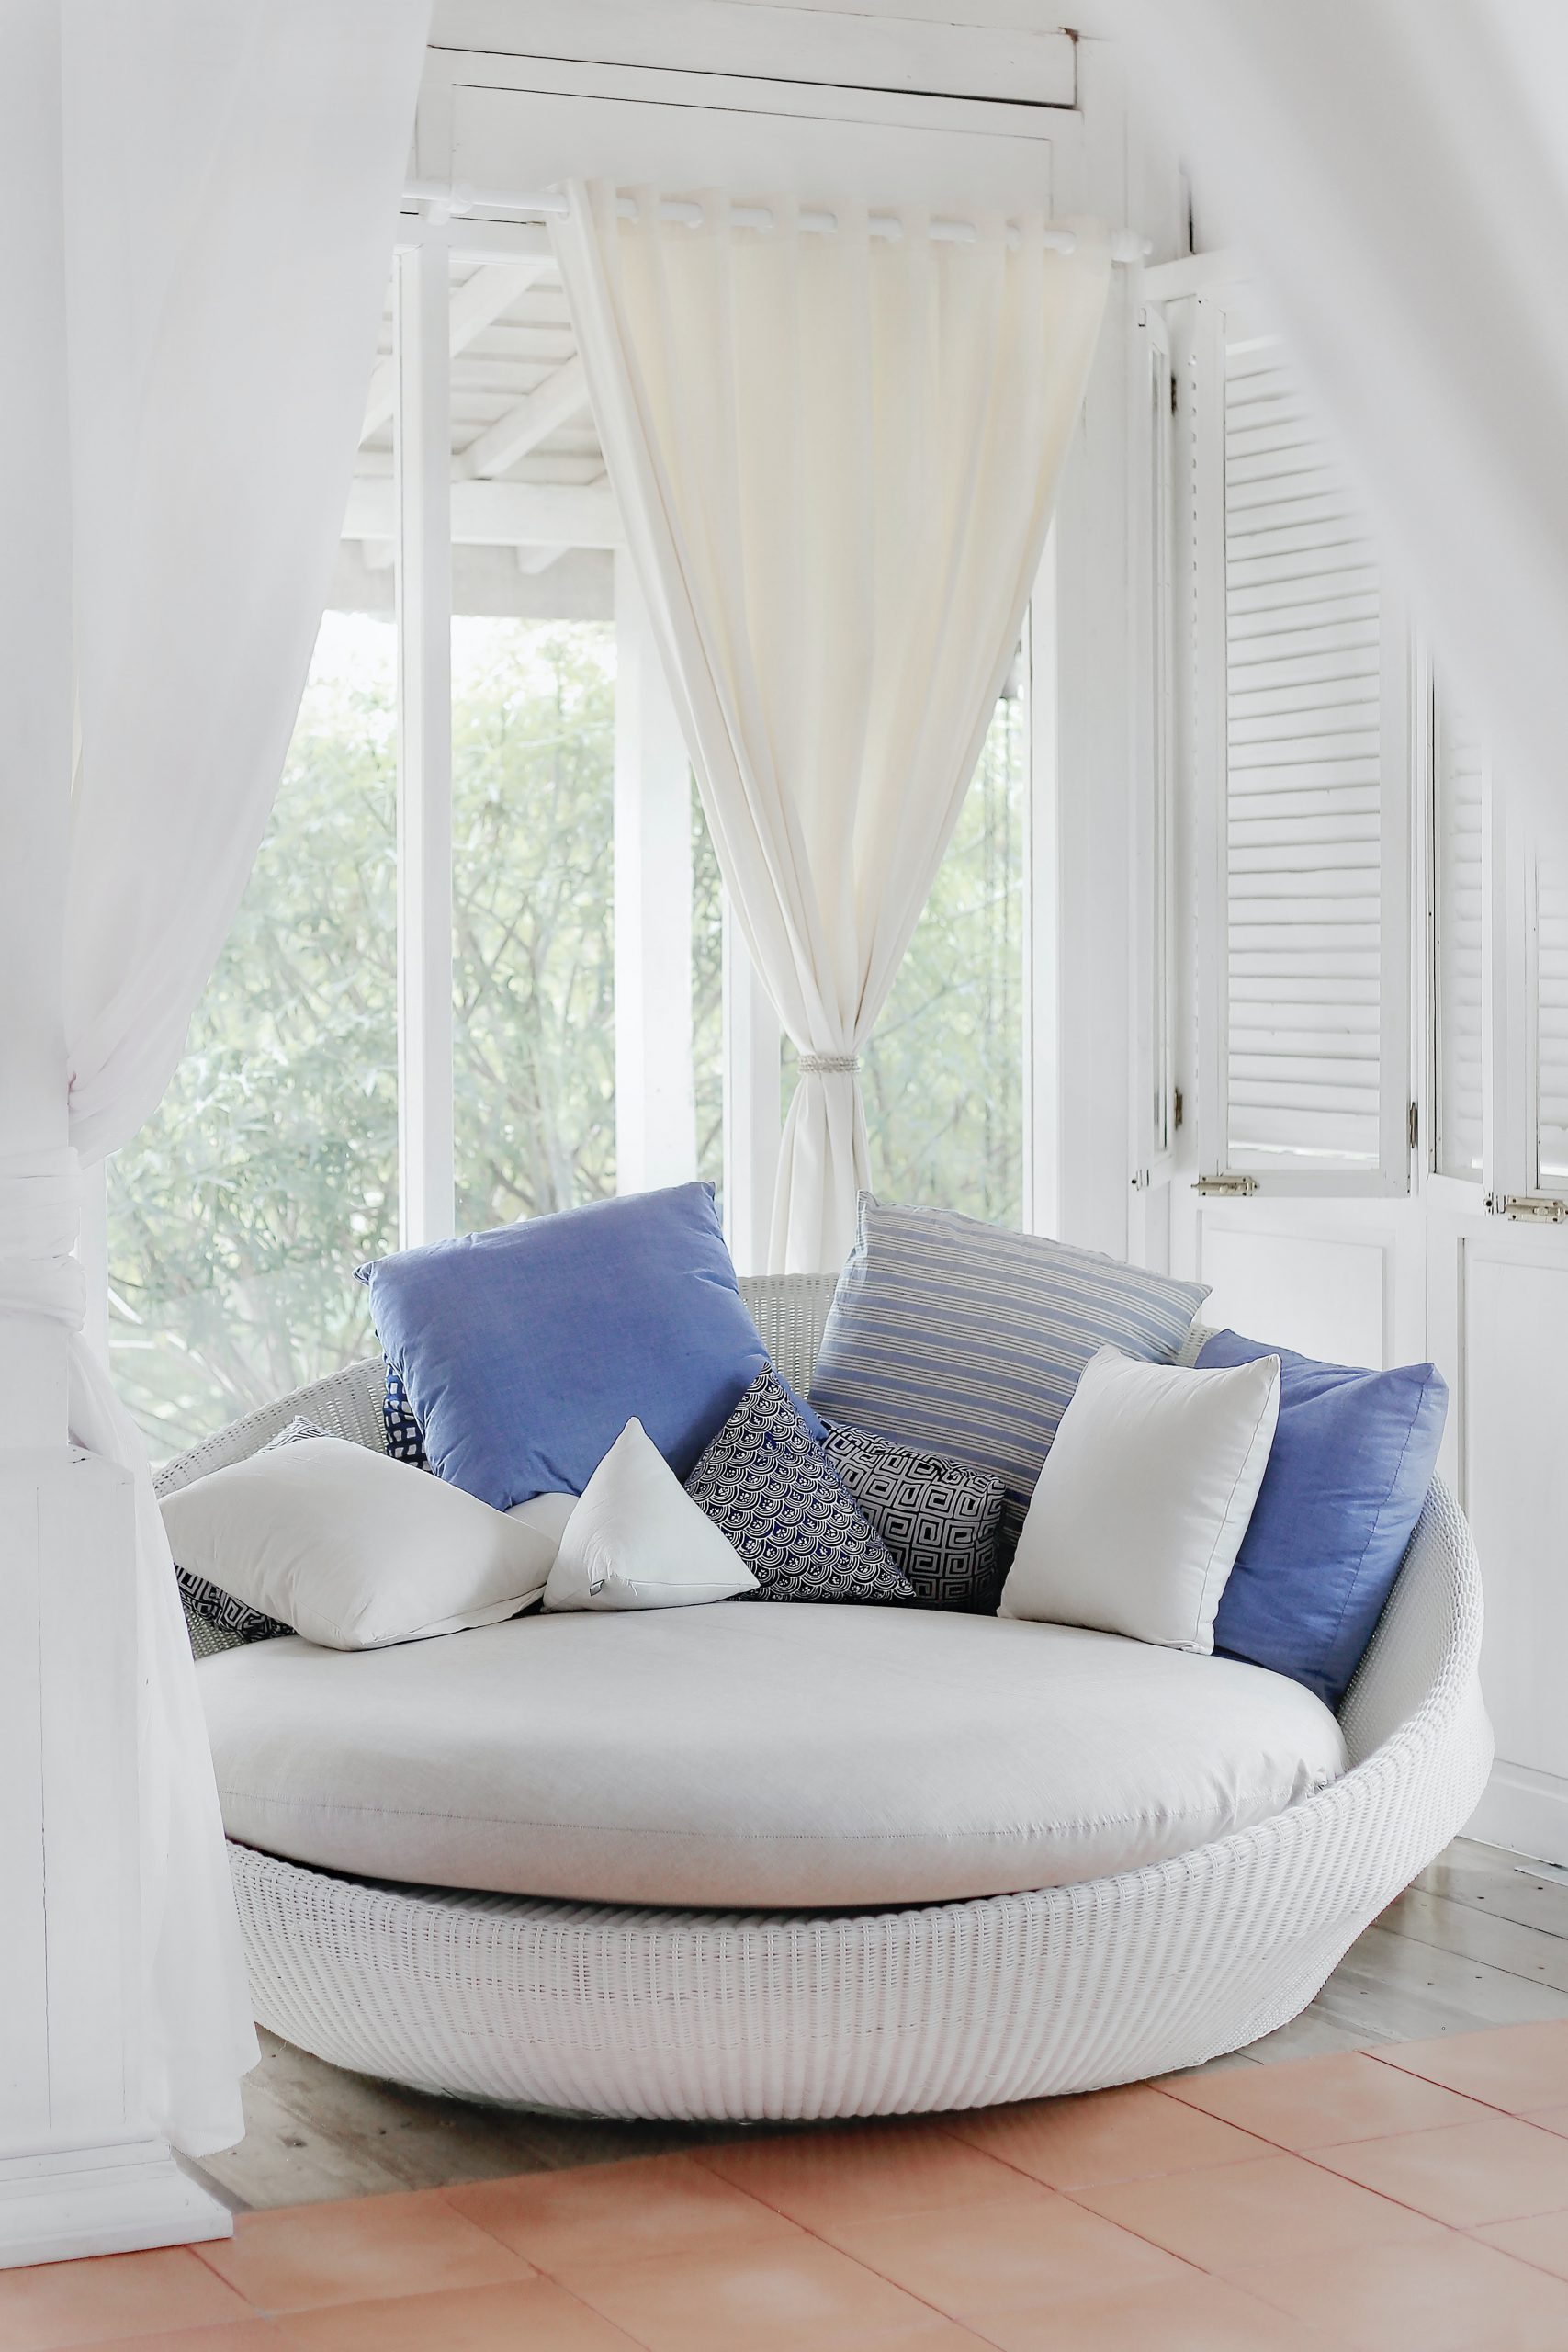 Tips on How to Refresh Home for Summer